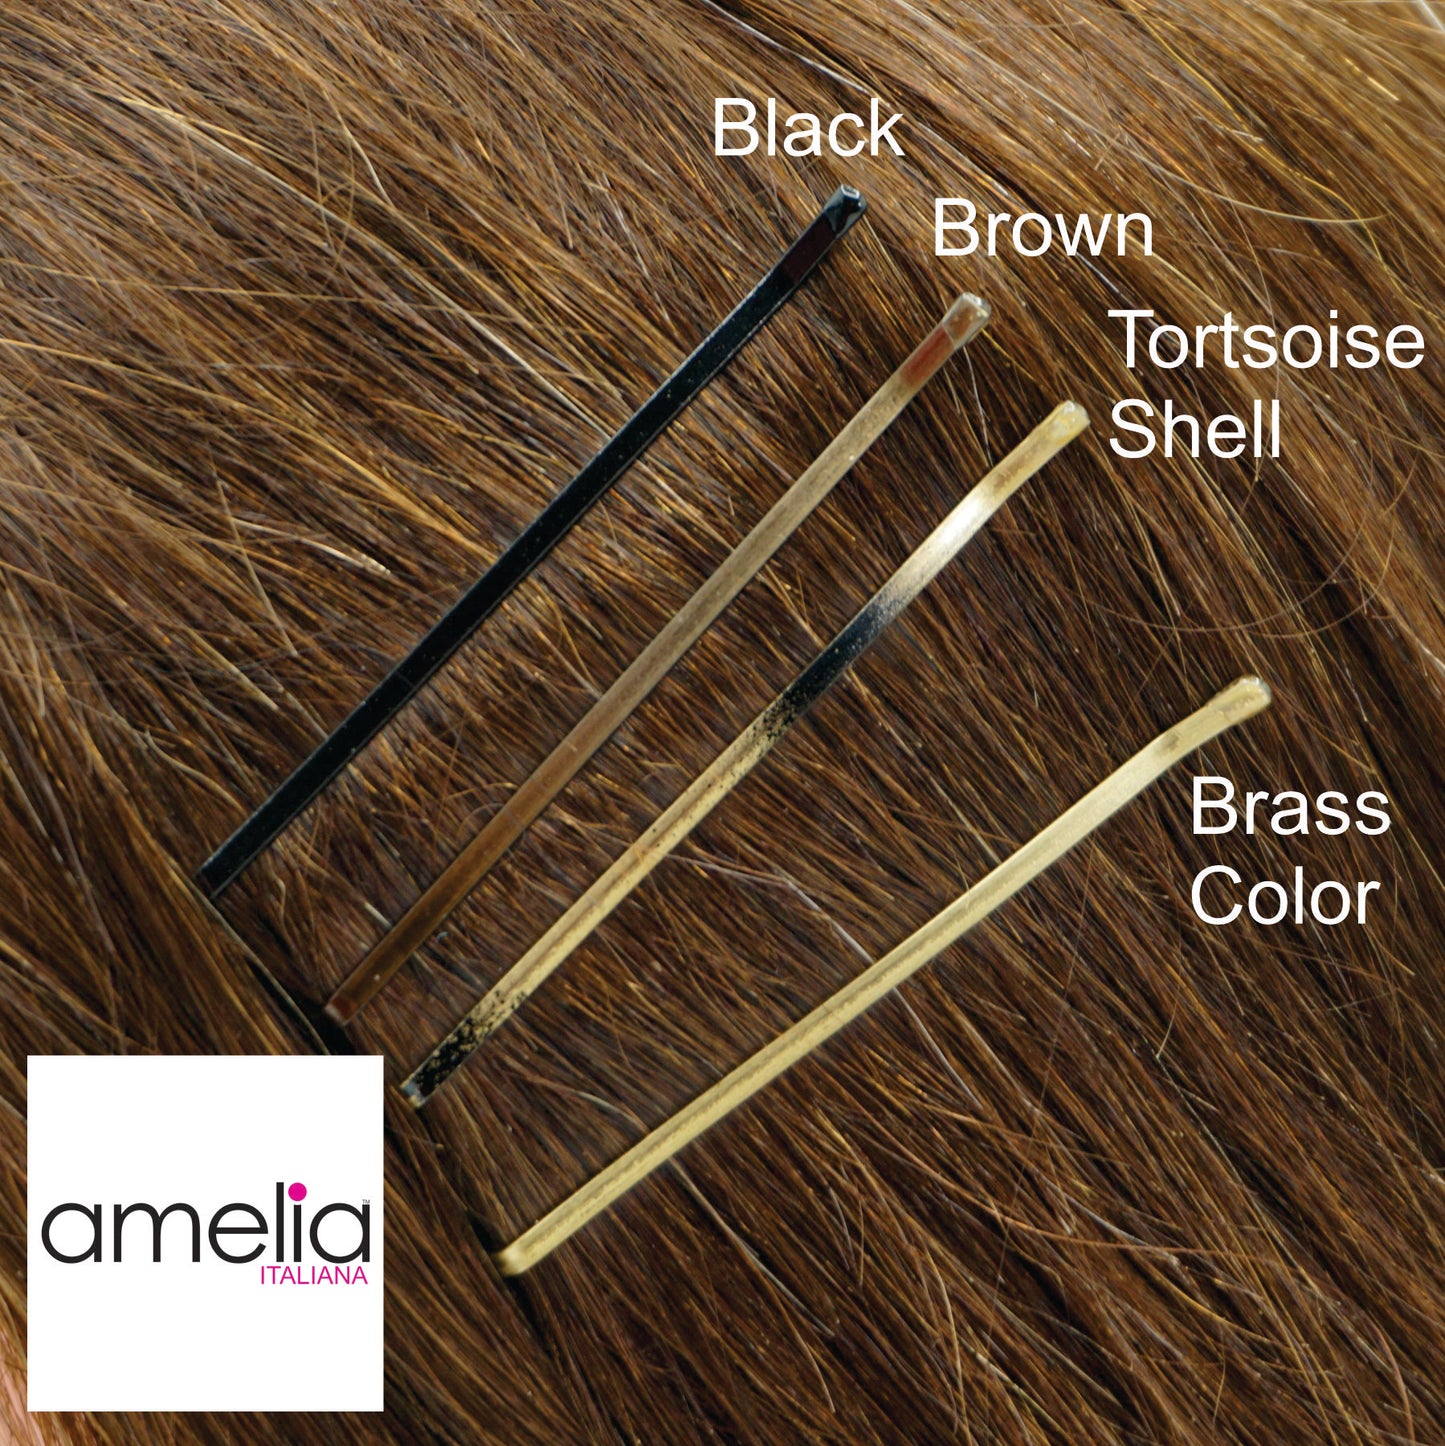 180, Tortoise Shell Color (Brassed/Black), 2.8in (7.0cm), Italian Made Jumbo Flat Bobby Pins, Recloseable Stay Clean and Organized Container